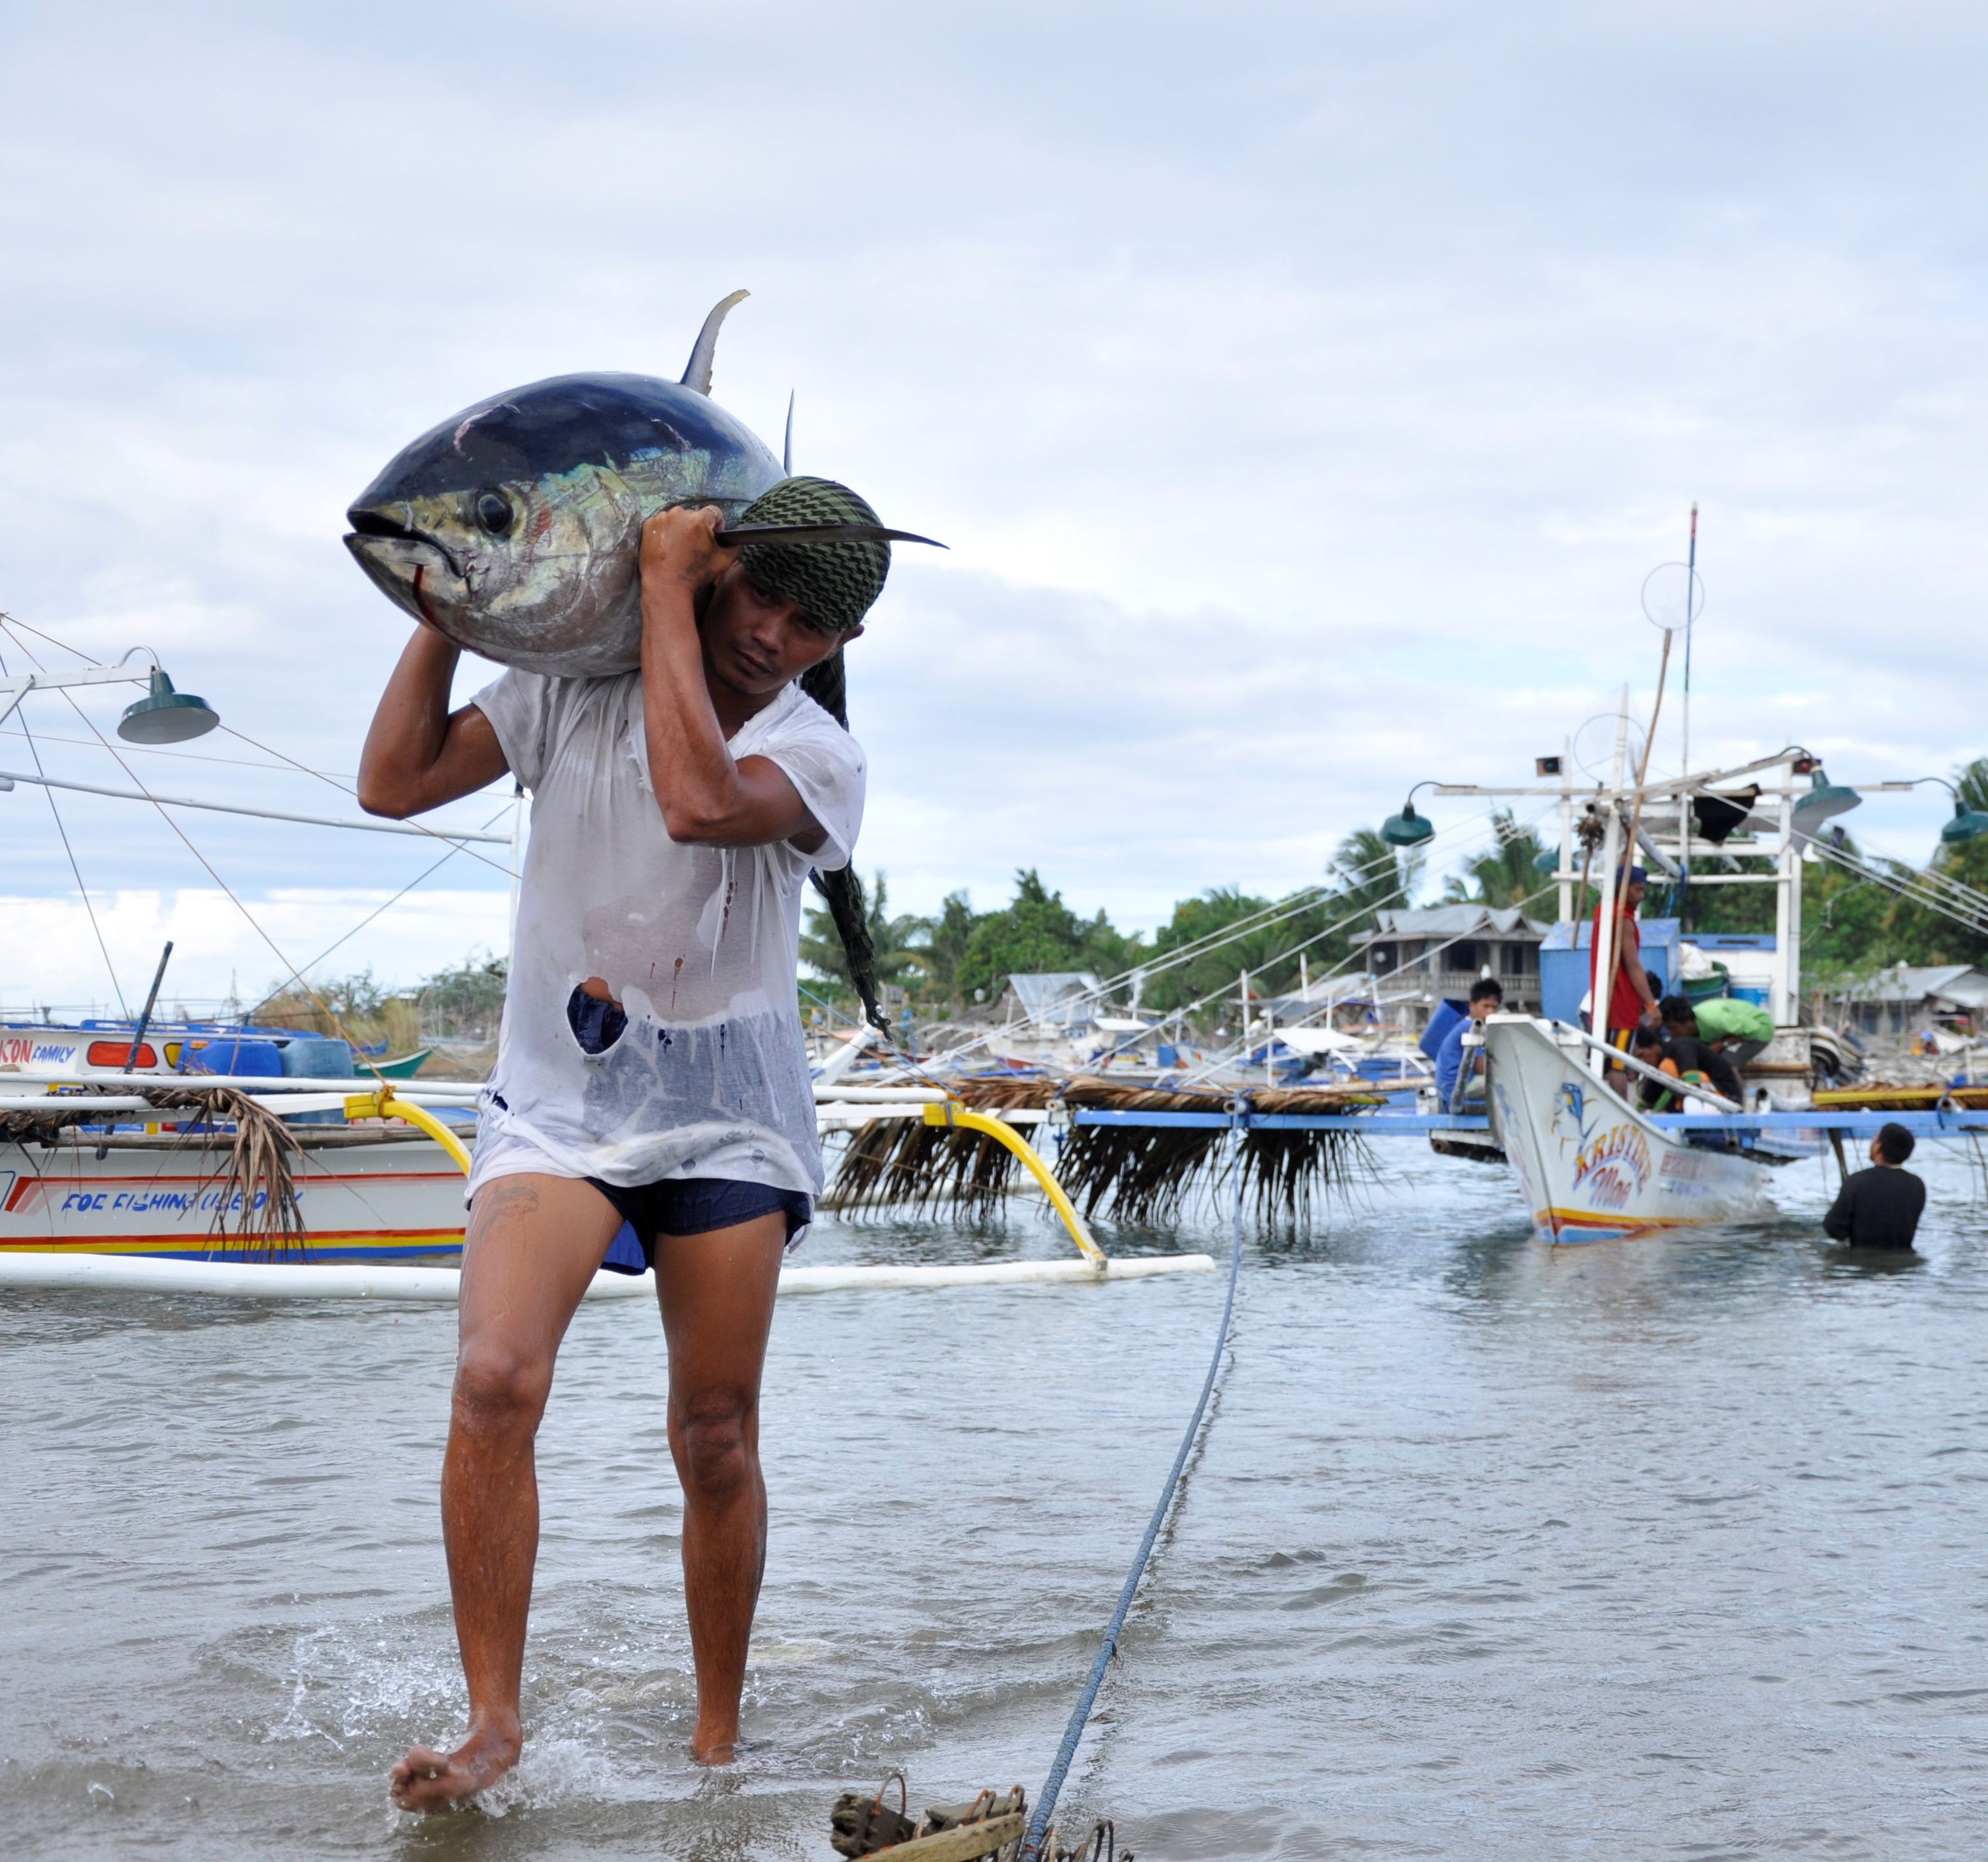 <h1>Mindoro Local Tuna Management Plan Launch</h1>
<p>May 2, 2019 saw the launch of the Mindoro Strait Tuna Fisheries Management Plan </p>
<p style="text-align: right;"><a href="https://support.wwf.org.ph/what-we-do/food/stp/mindoro-strait-local-tuna-management-plan/" target="_blank">Read More &gt;</a></p>